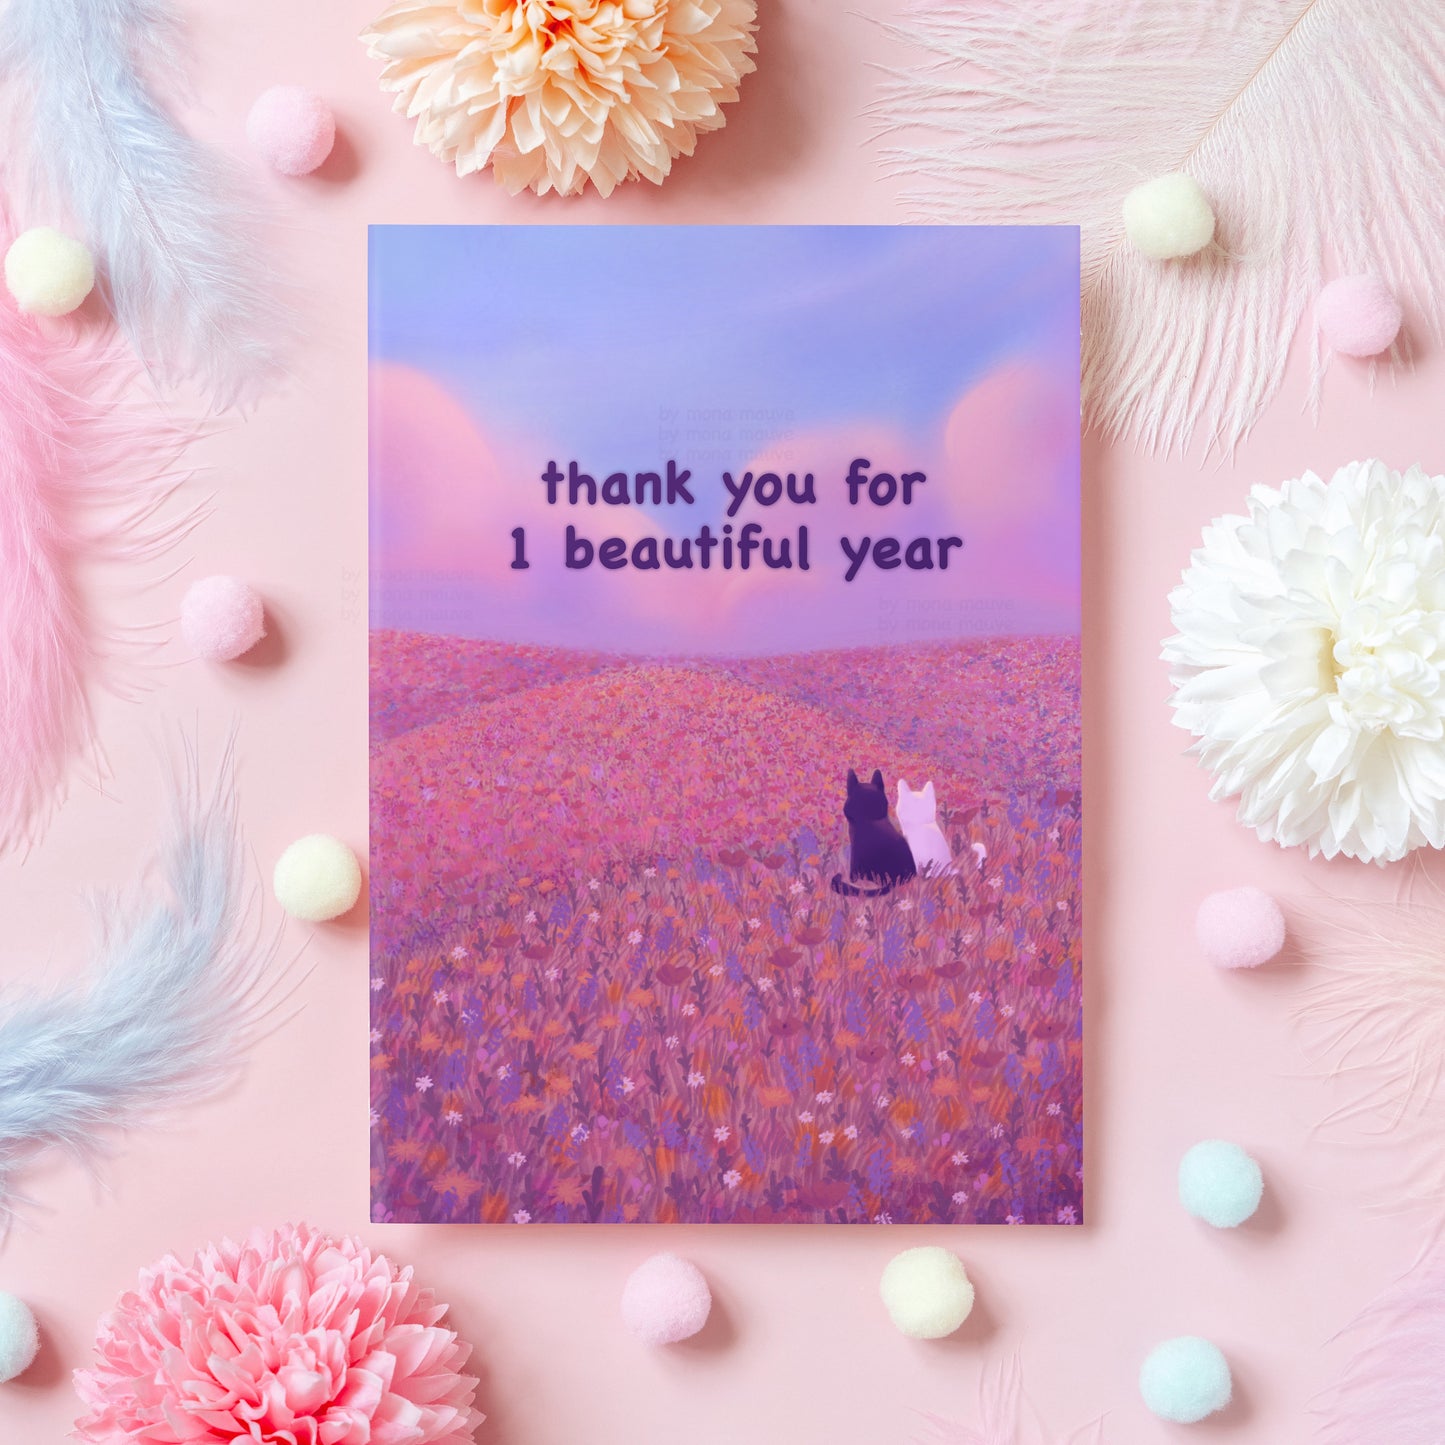 Cute First Anniversary Card | Thank You for 1 Beautiful Year | Heartfelt Gift for Husband, Wife, Boyfriend, Girlfriend - Her or Him